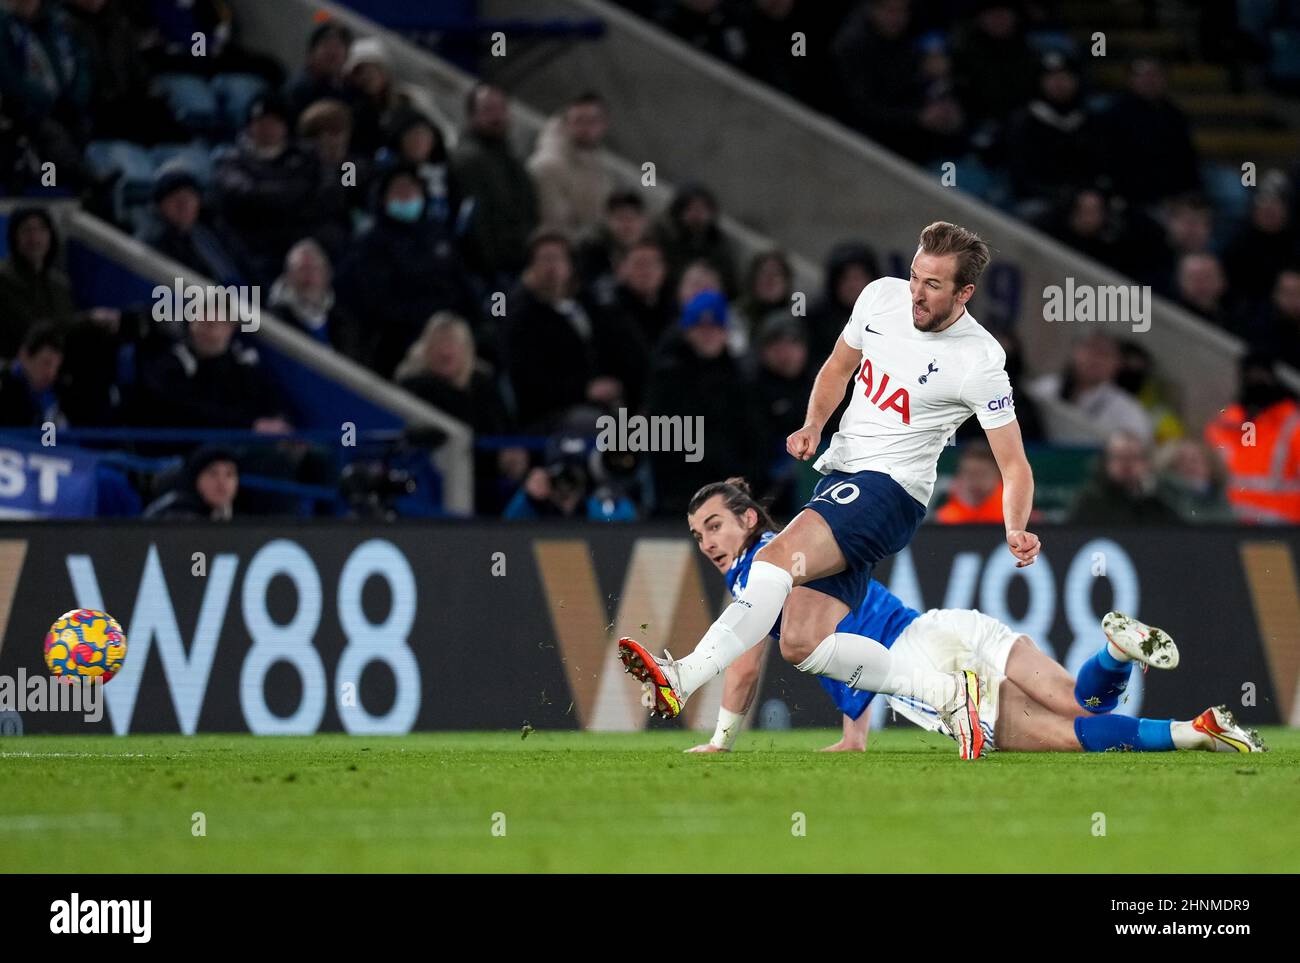 Leicester, UK. 19th Jan, 2022. Harry Kane of Spurs scores during the Premier League match between Leicester City and Tottenham Hotspur at the King Power Stadium, Leicester, England on 19 January 2022. Photo by Andy Rowland. Credit: PRiME Media Images/Alamy Live News Stock Photo